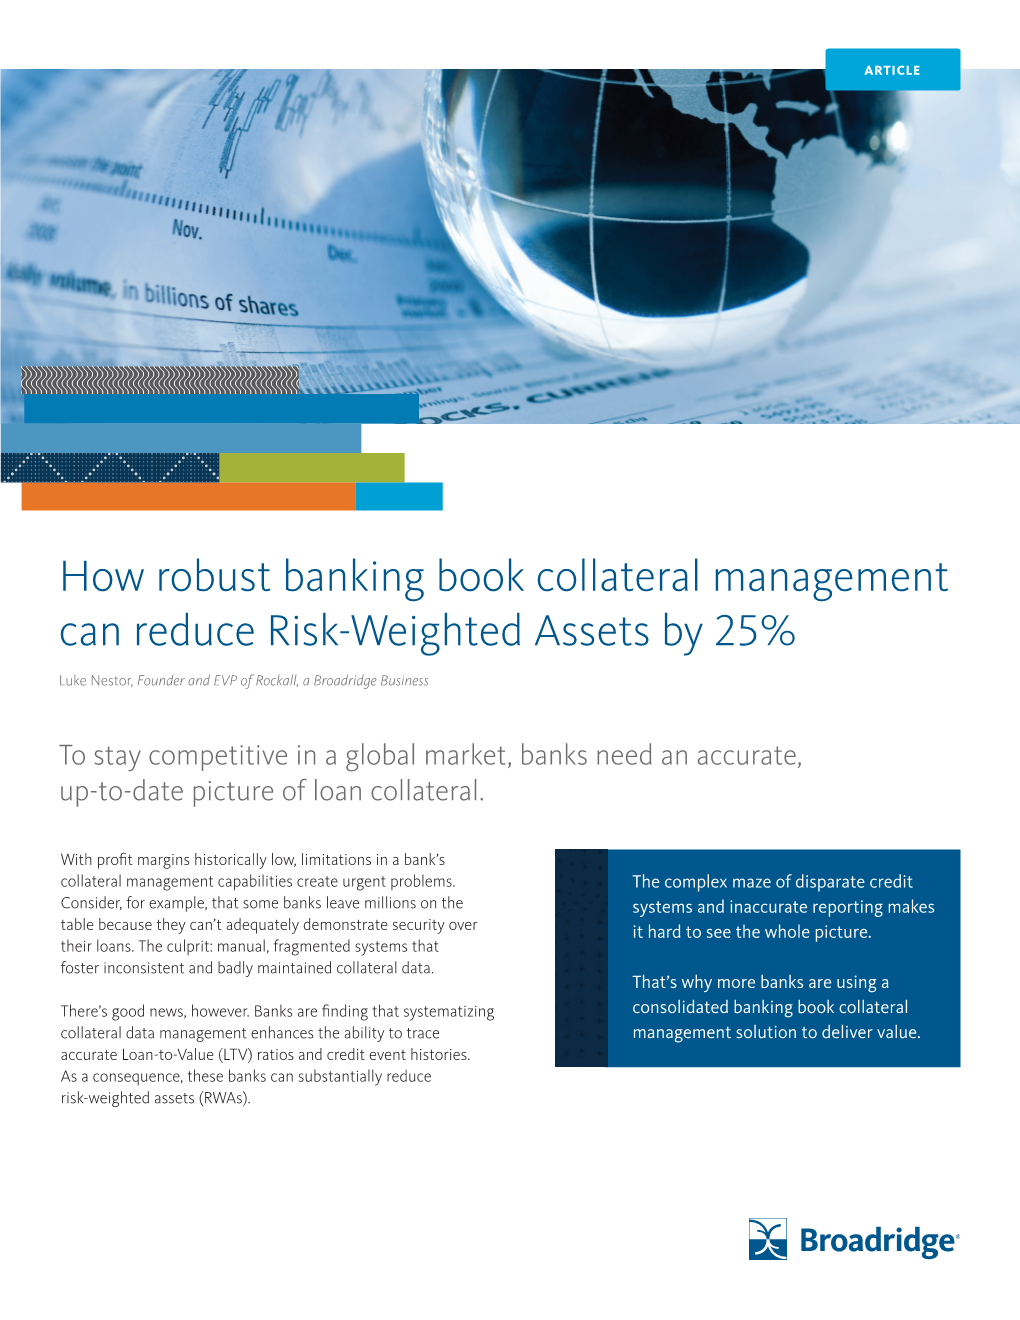 How Robust Banking Book Collateral Management Can Reduce Risk-Weighted Assets by 25%